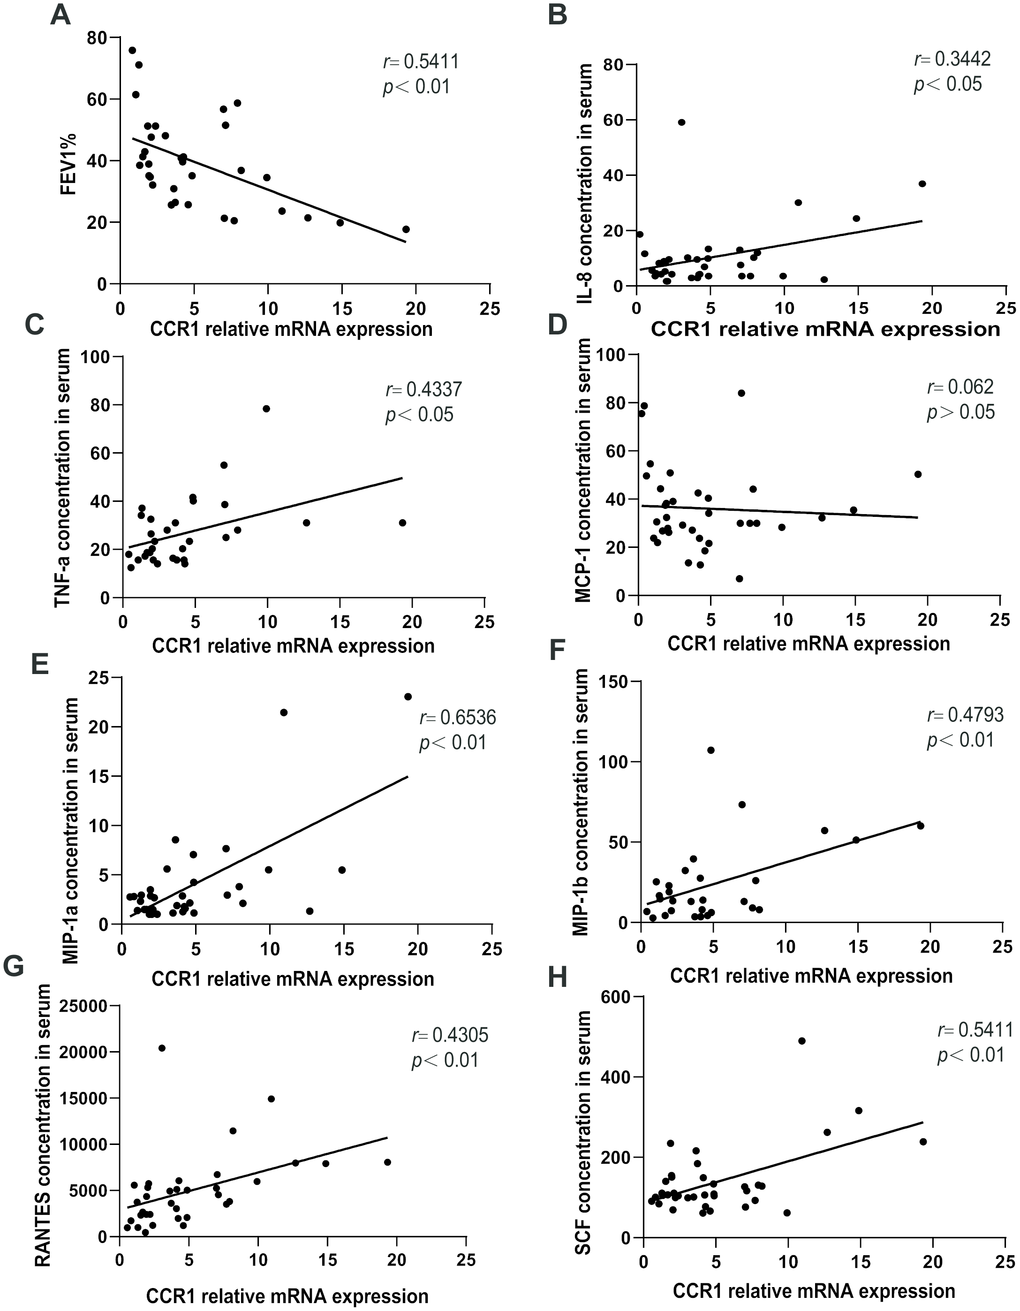 Relationships between CCR1 mRNA and cytokine expression levels and FEV1%pred. A negative correlation is observed between CCR1 mRNA levels in the peripheral blood and FEV1%pred in patients with COPD (A). There are significant positive correlations between (B) CCR1 mRNA levels and IL-8, (C) IL-6, (D) MIP-1 (E) α/β, (F) RANTES, (G) SCF, and (H) TNF-α concentrations.